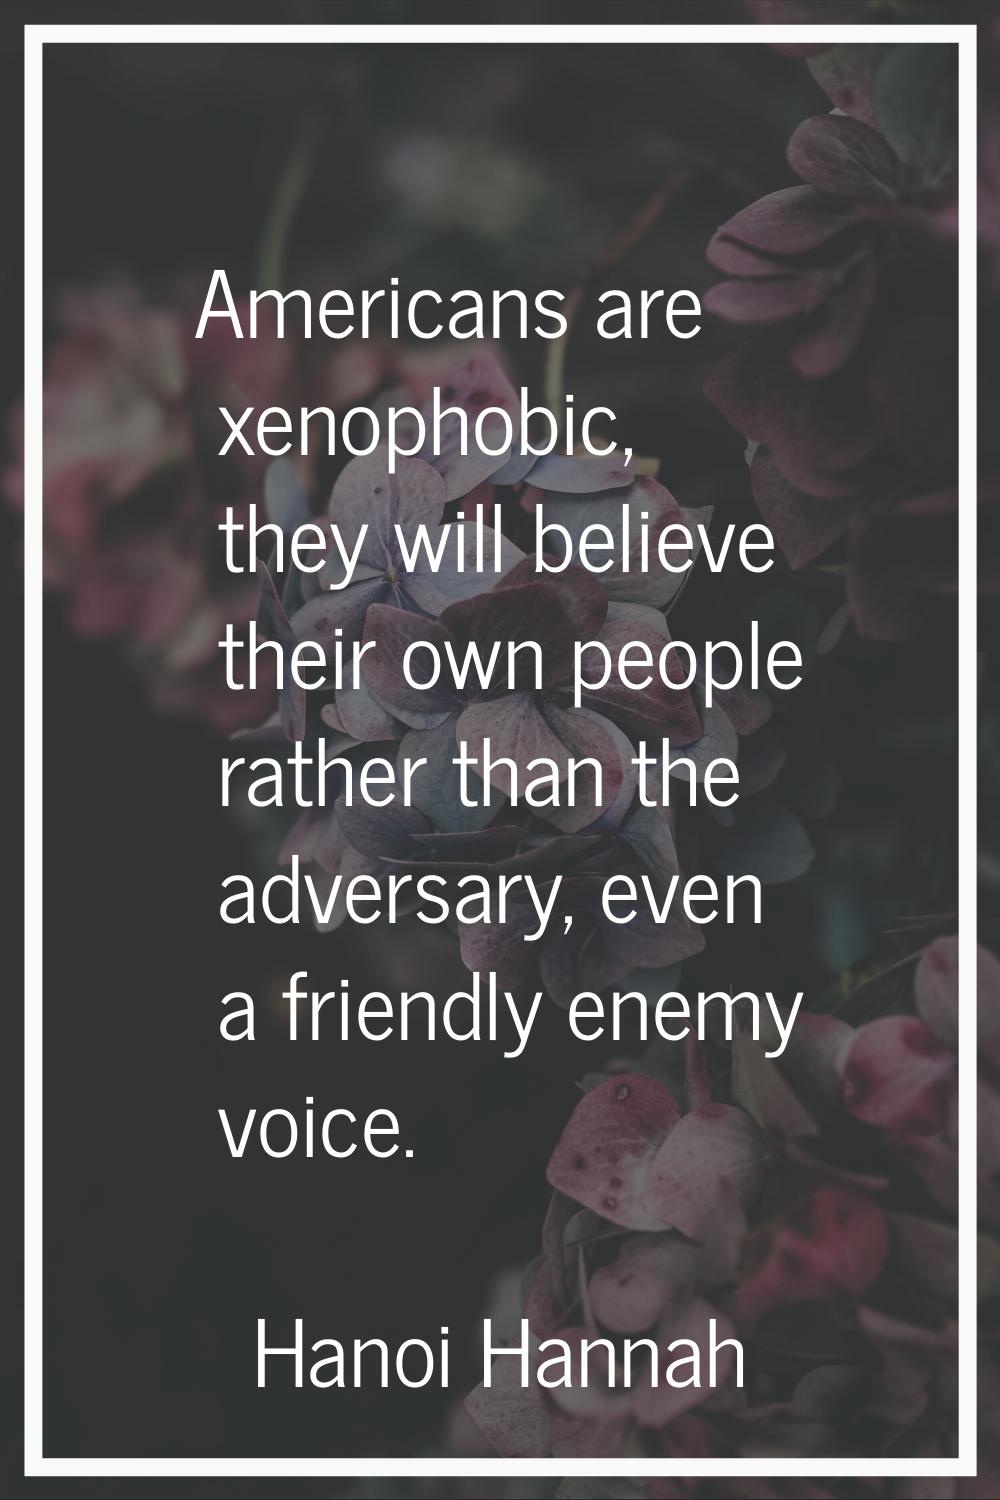 Americans are xenophobic, they will believe their own people rather than the adversary, even a frie